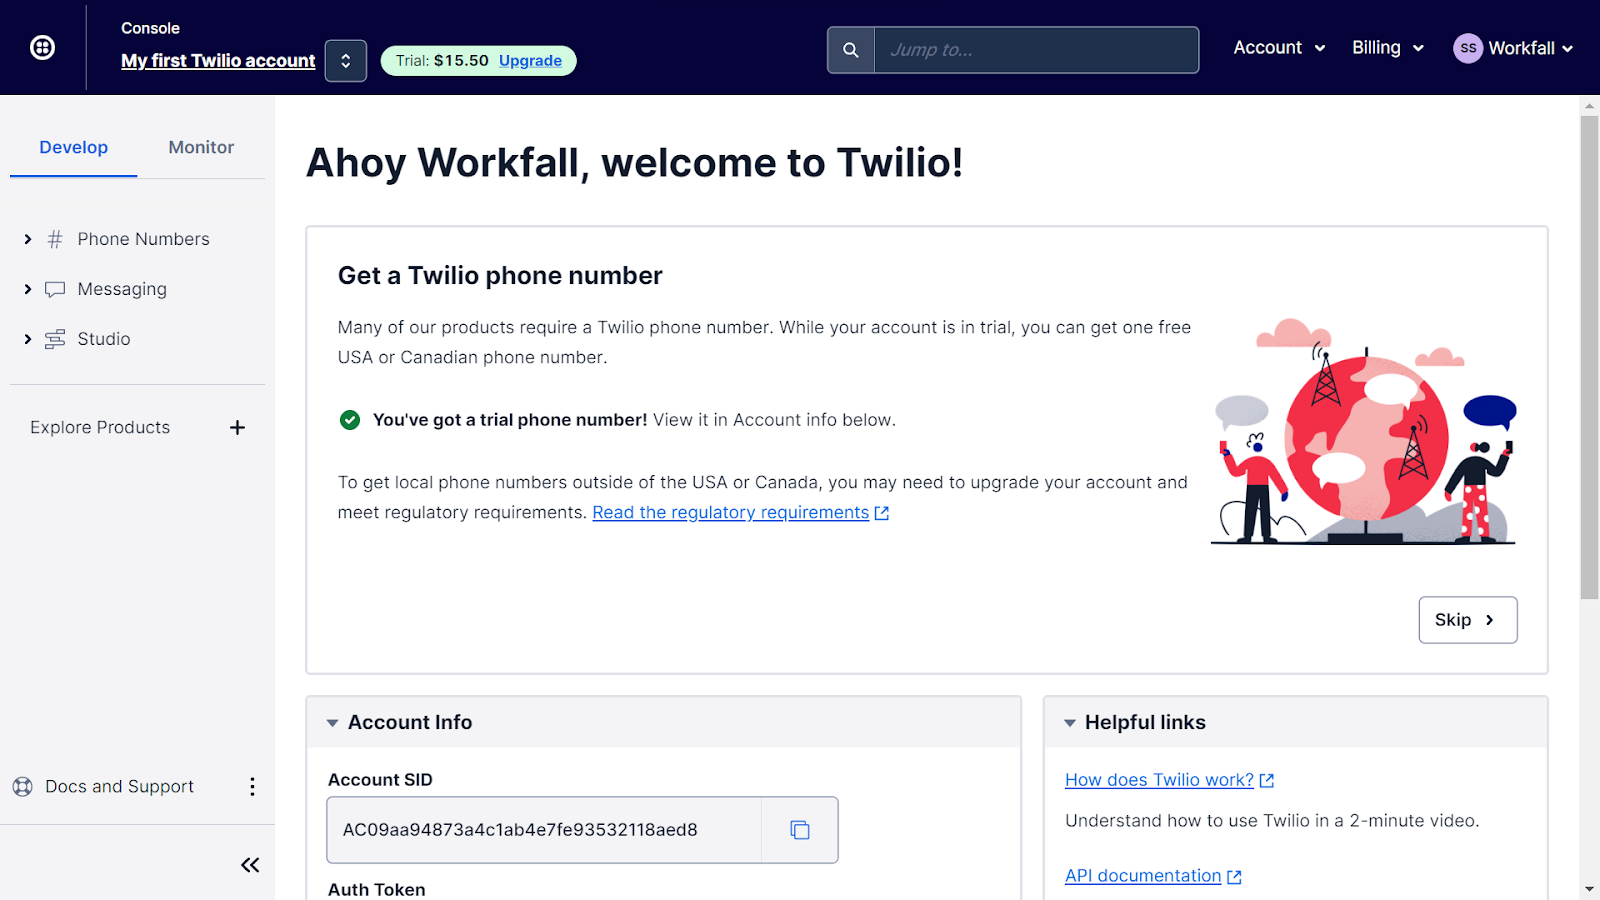 Build a communication microservice to send text messages using Twilio and Express